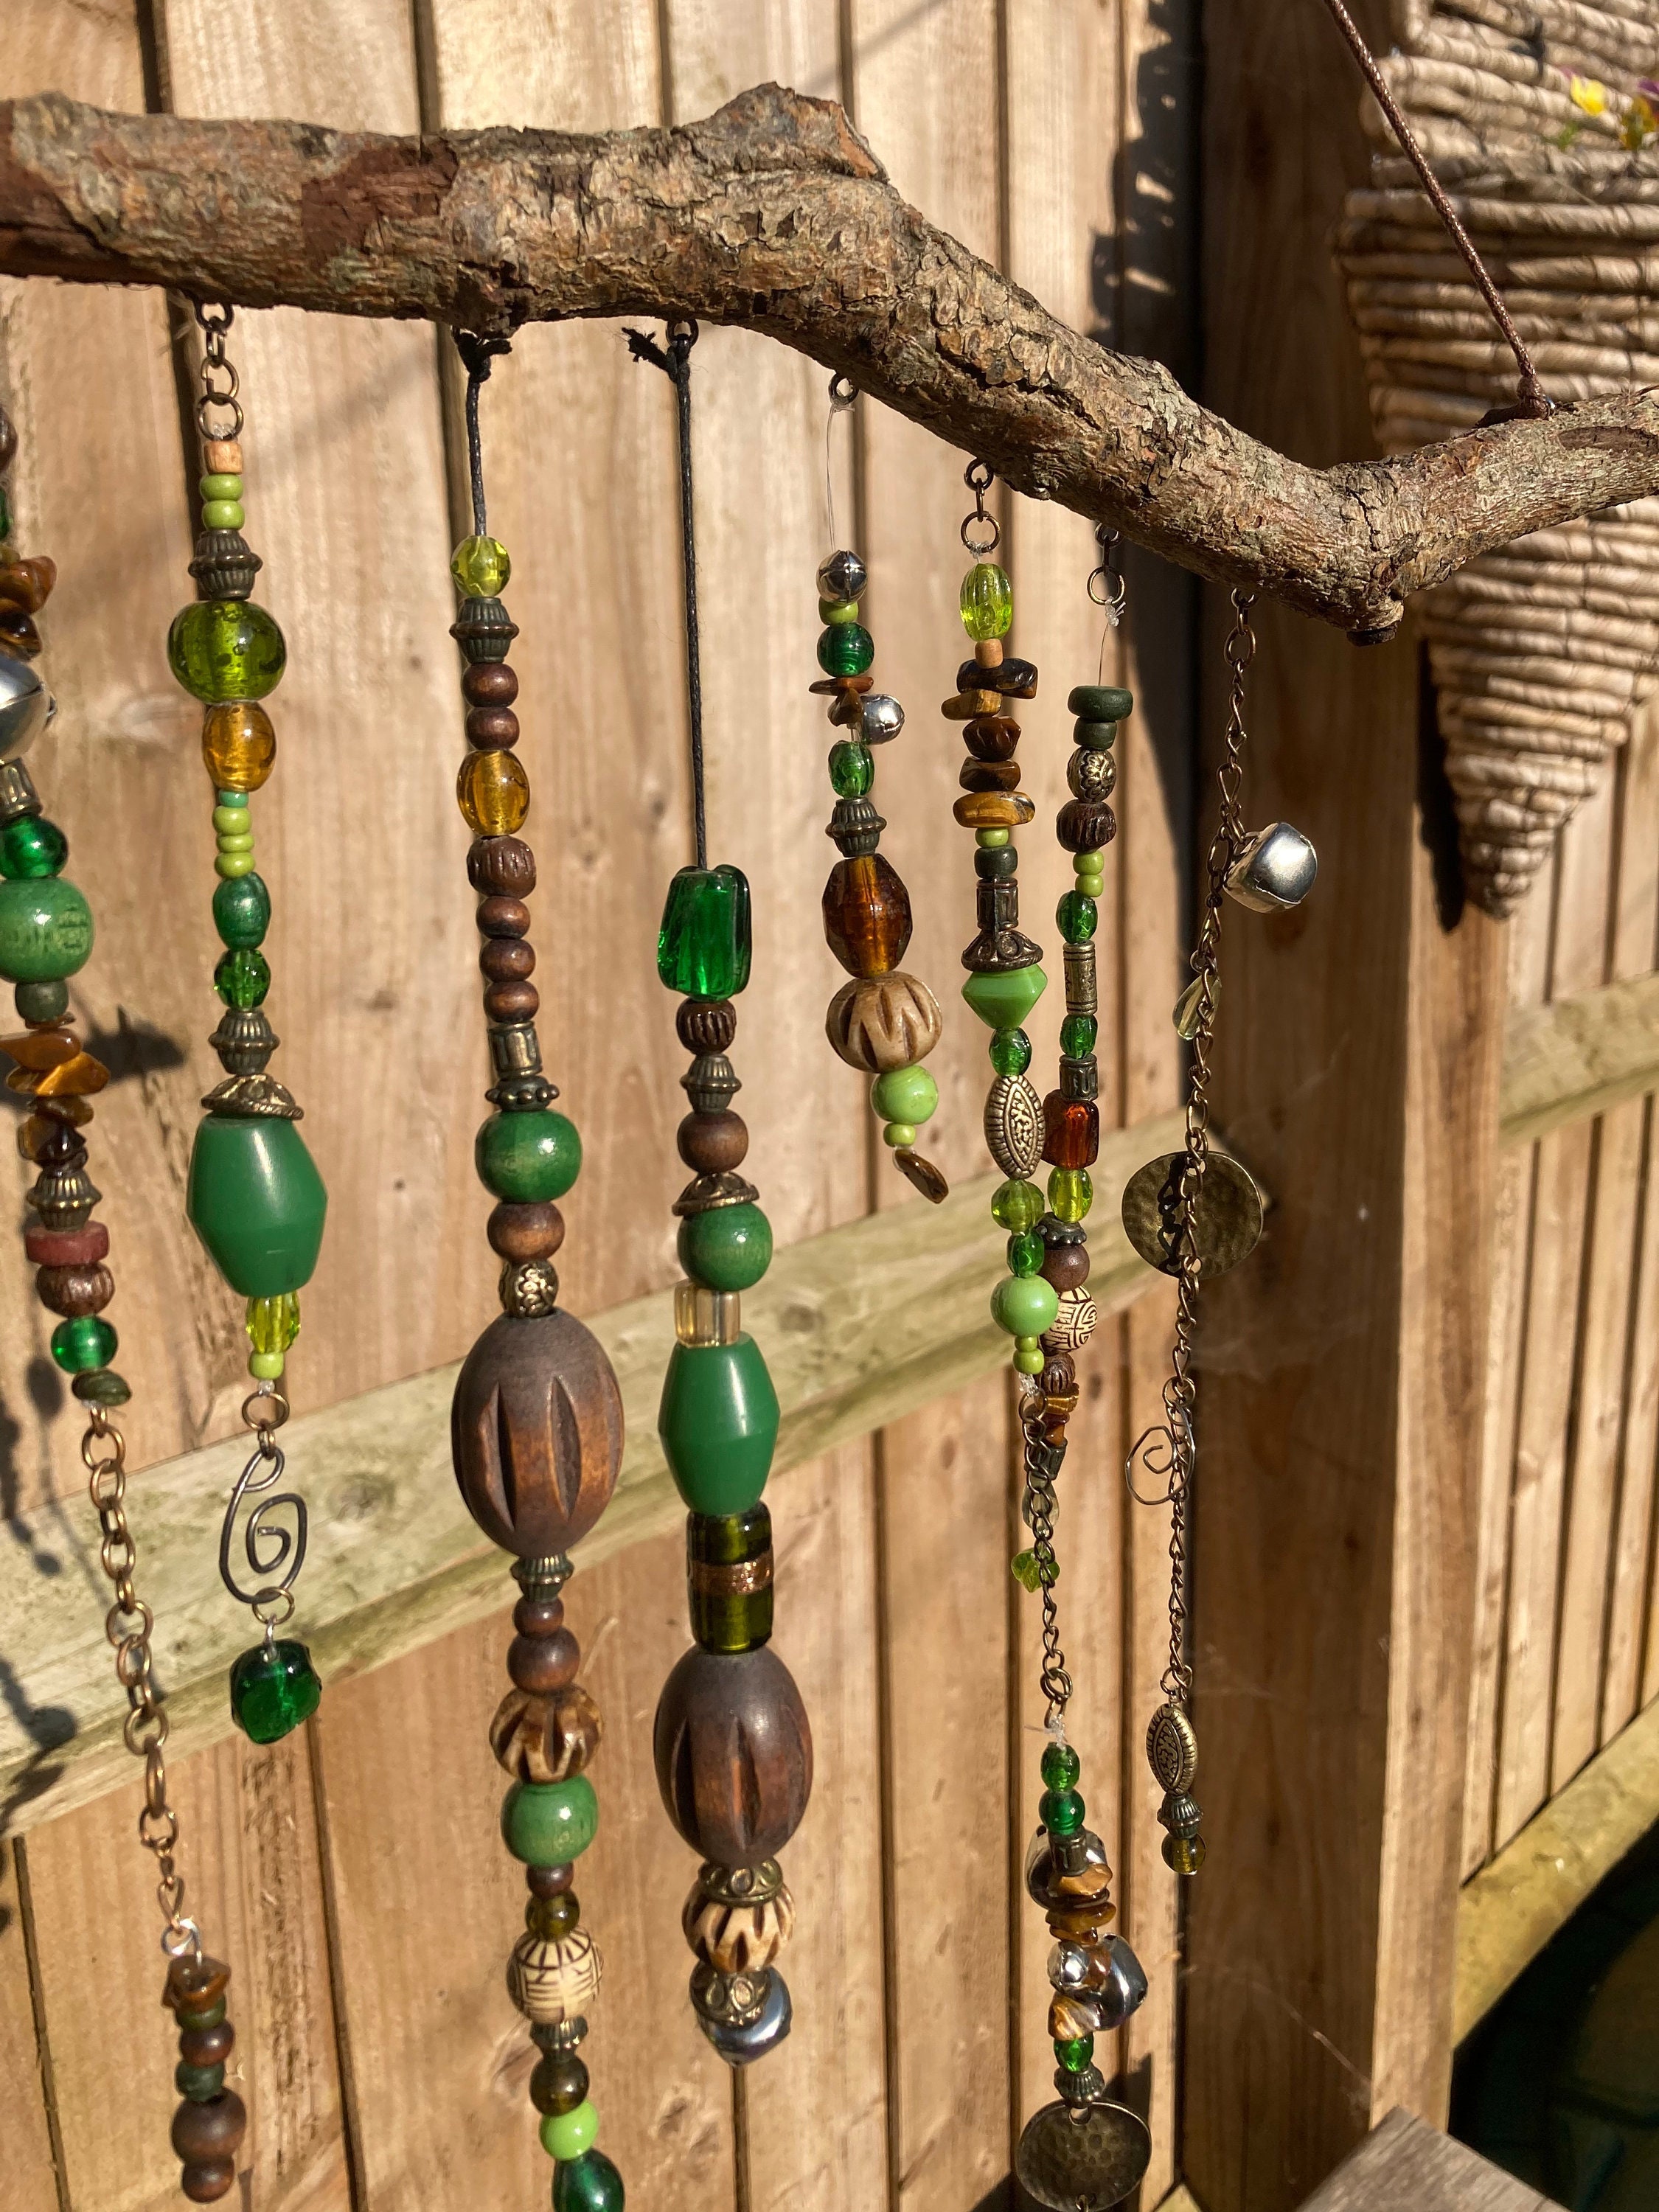 Wiueurtly Clear Beads Theme Hanging Wood Decorations Wooden